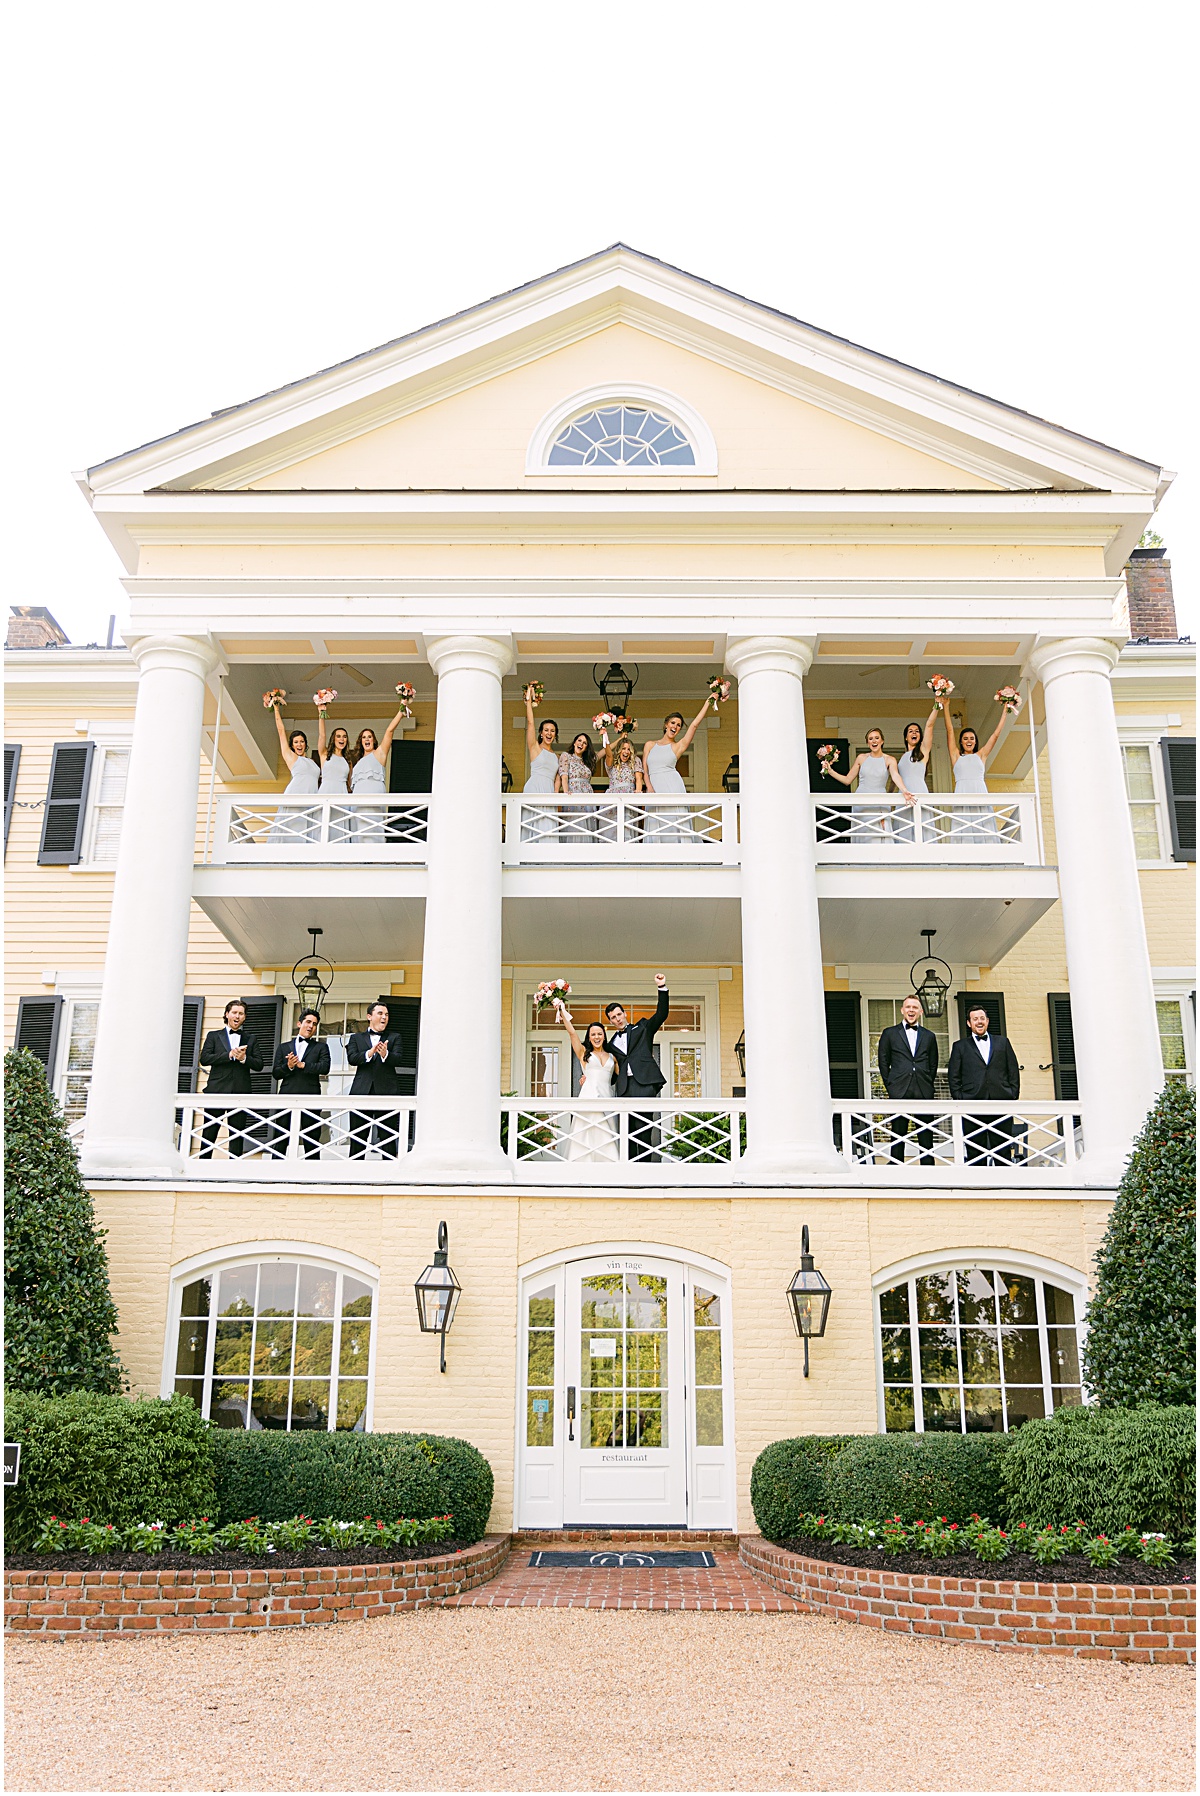 Wedding Party. Joyful summer wedding at the Inn at Willow Grove by Sarah Bradshaw. Planning by Kelley Cannon Events.